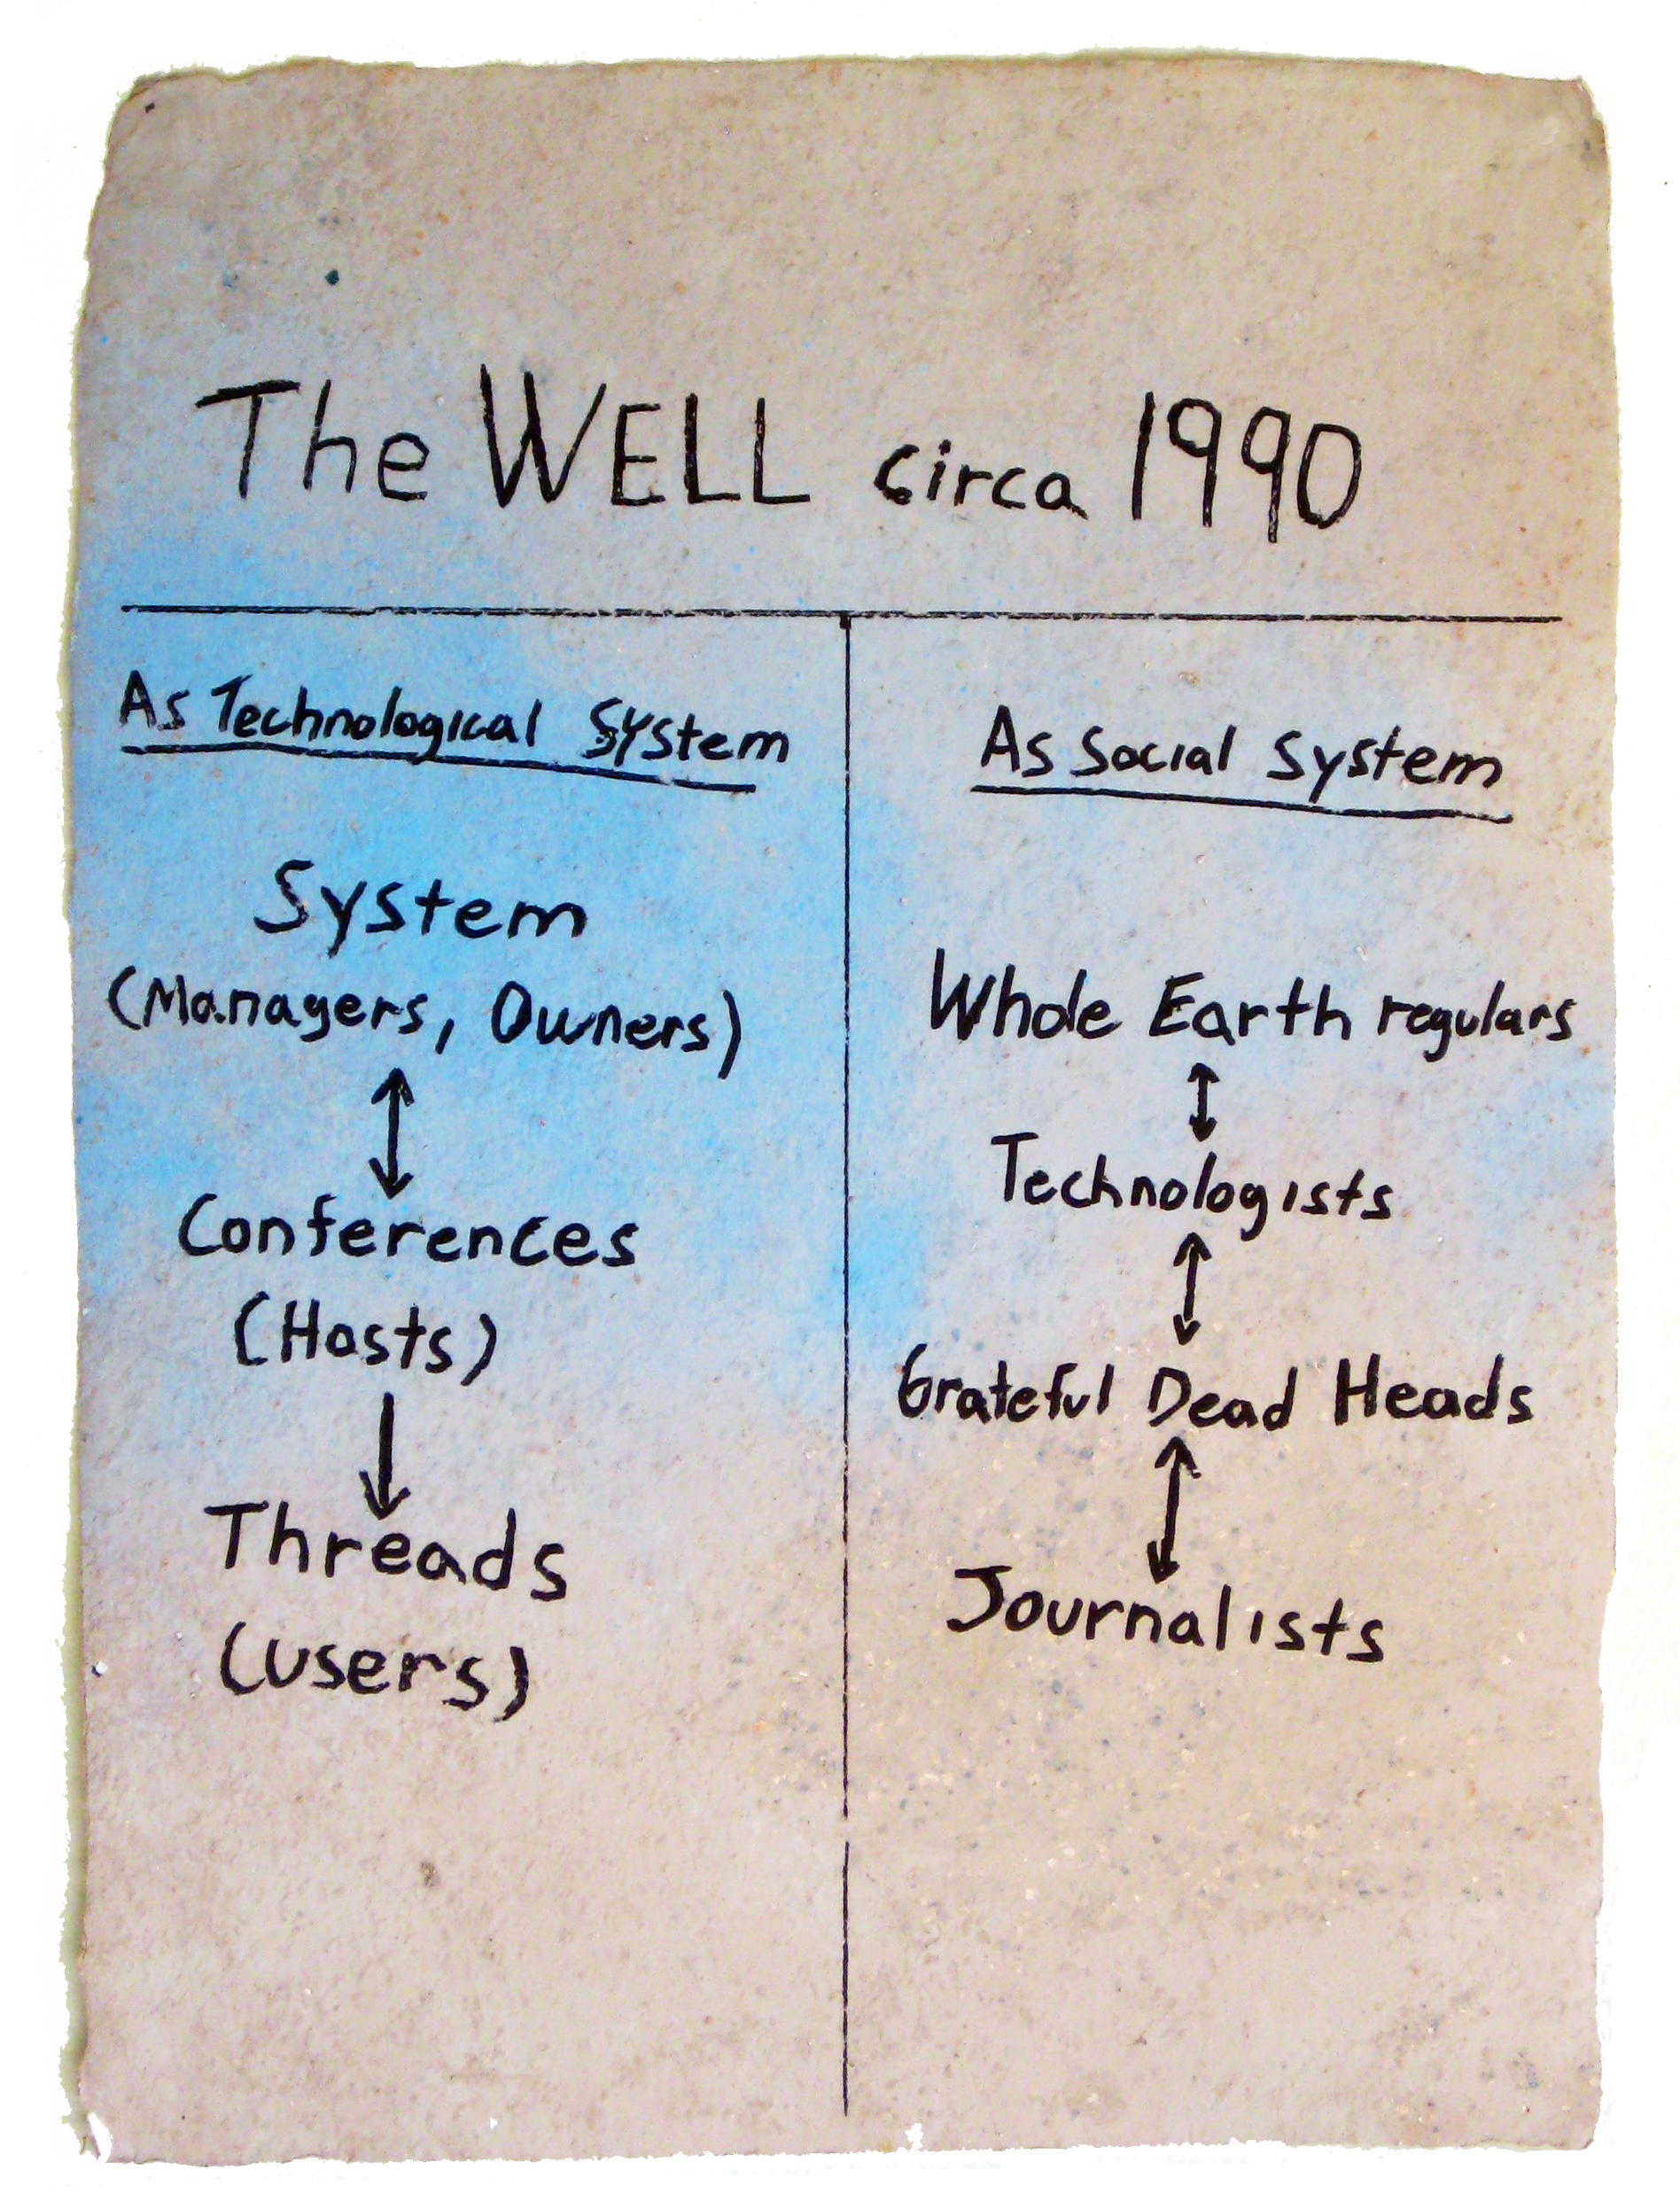 The WELL circa 1990